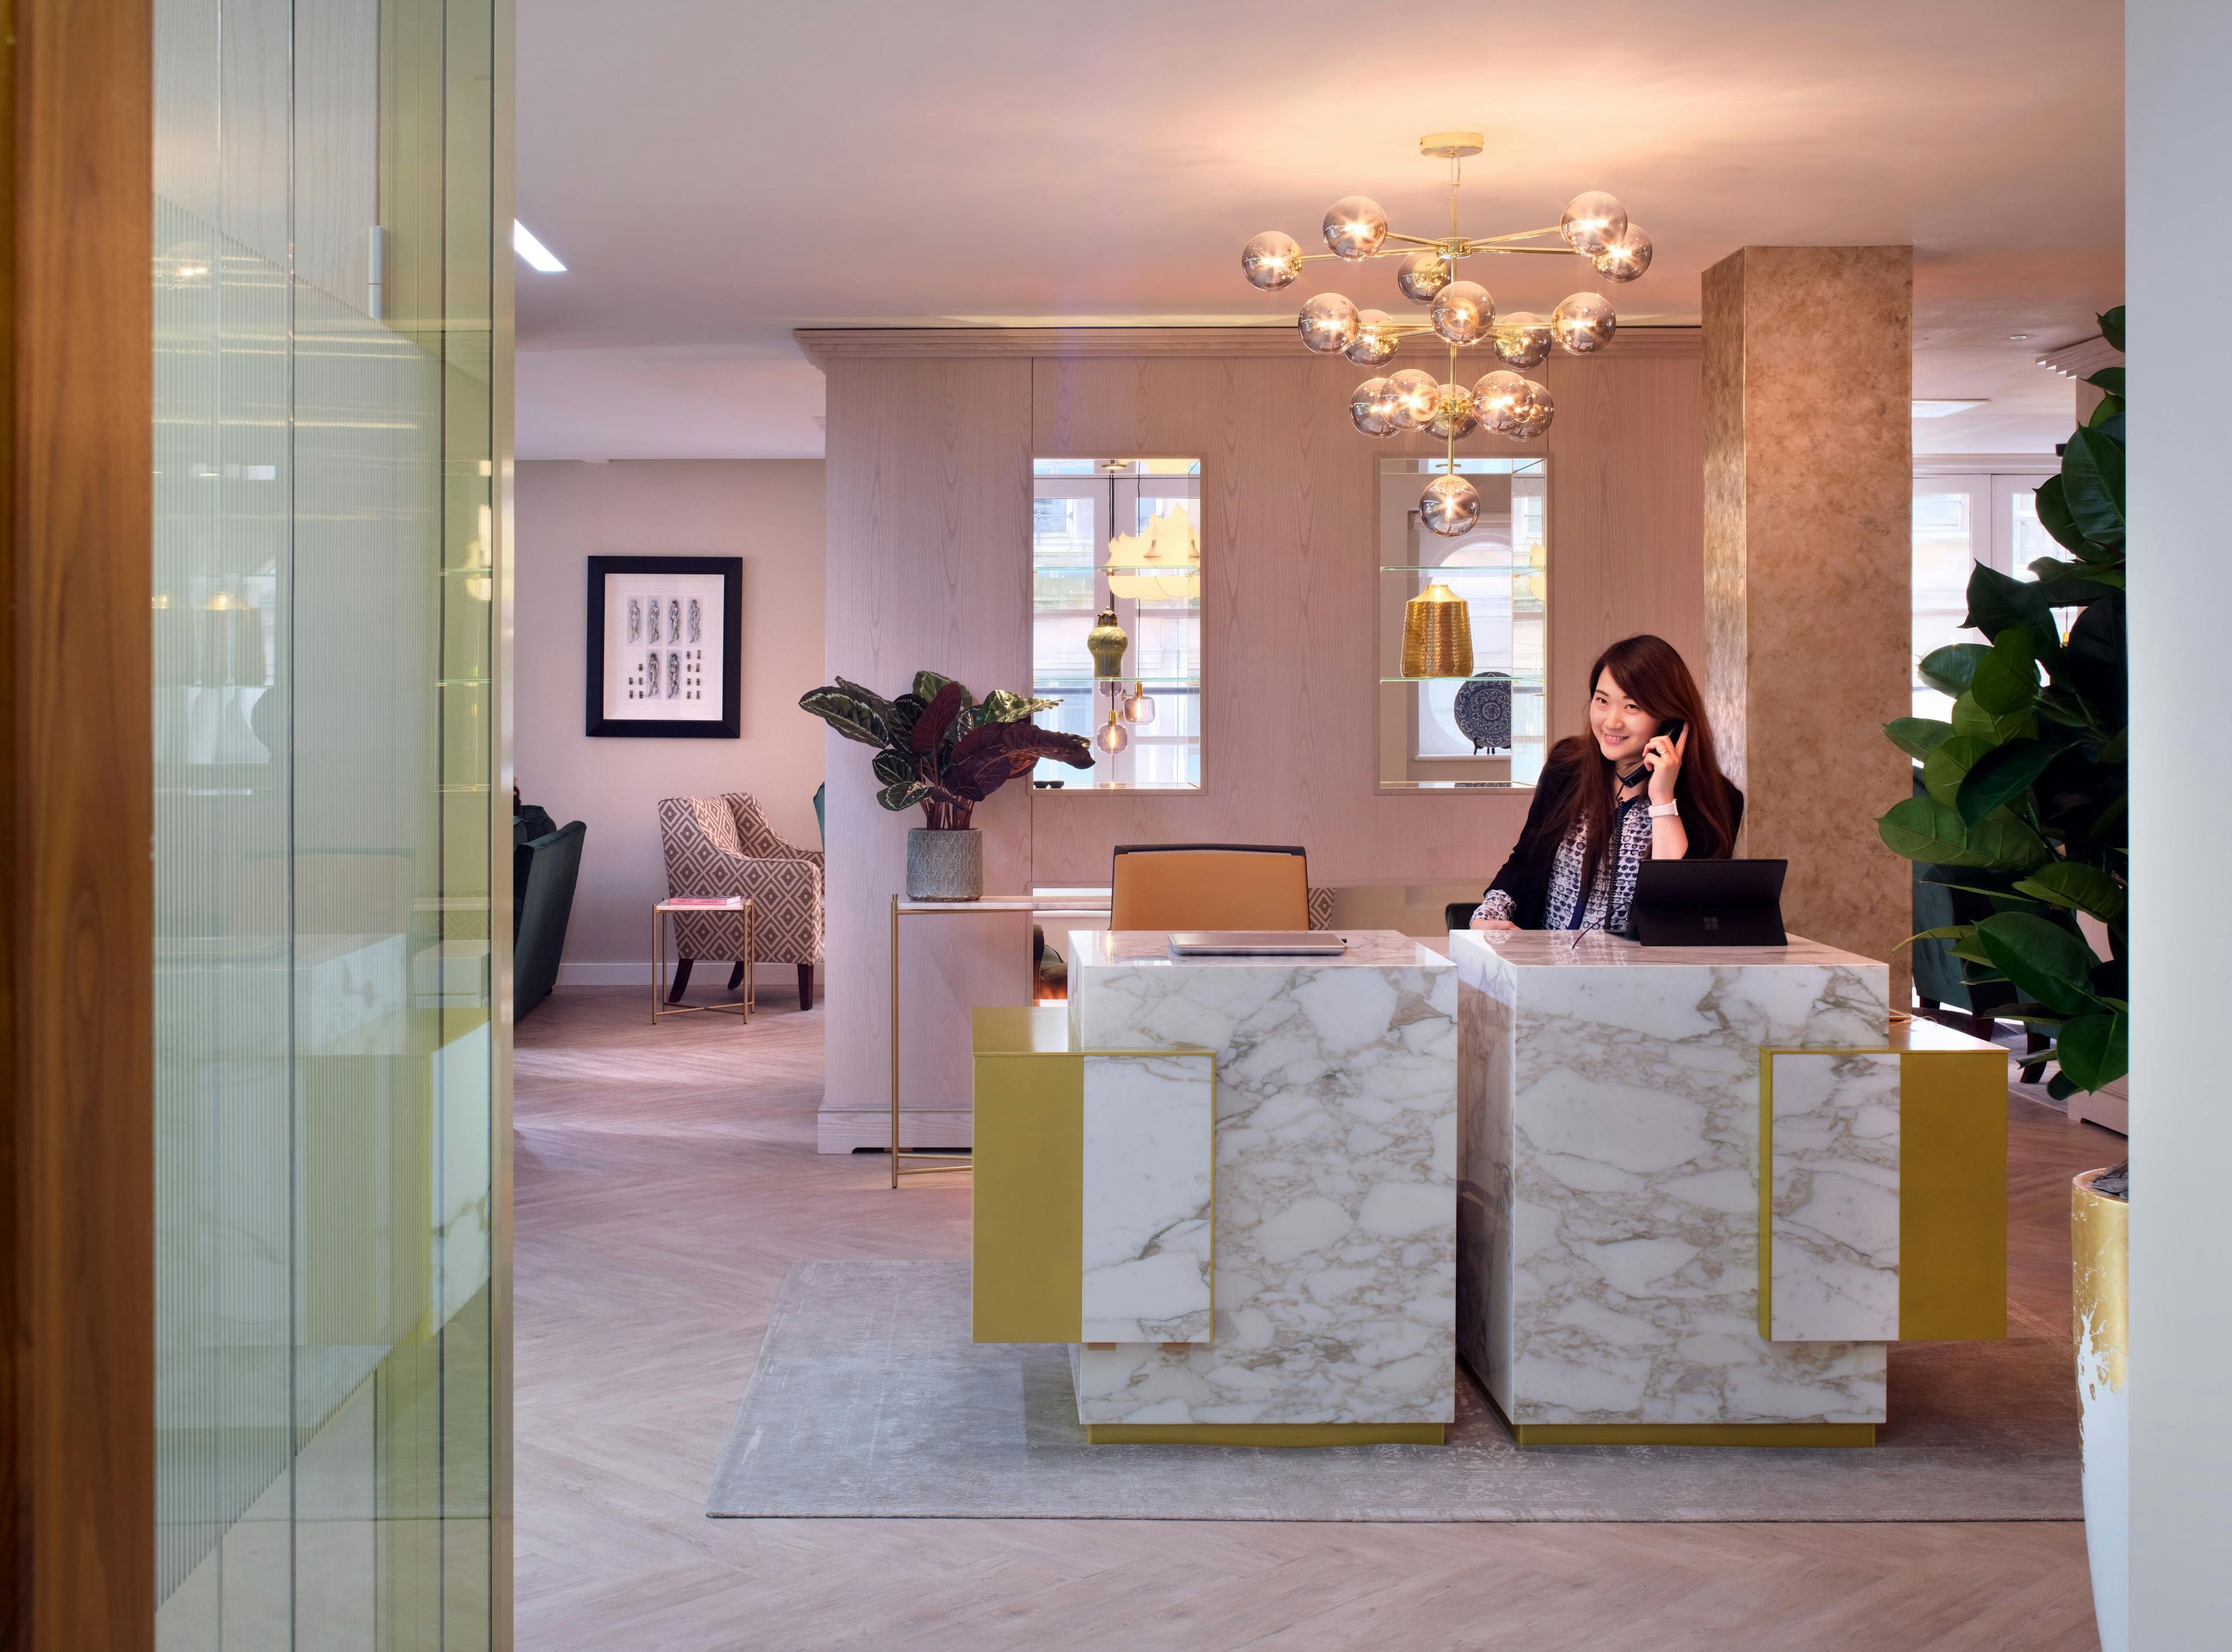 Mayfair – 12 Person Office - Hanover Square